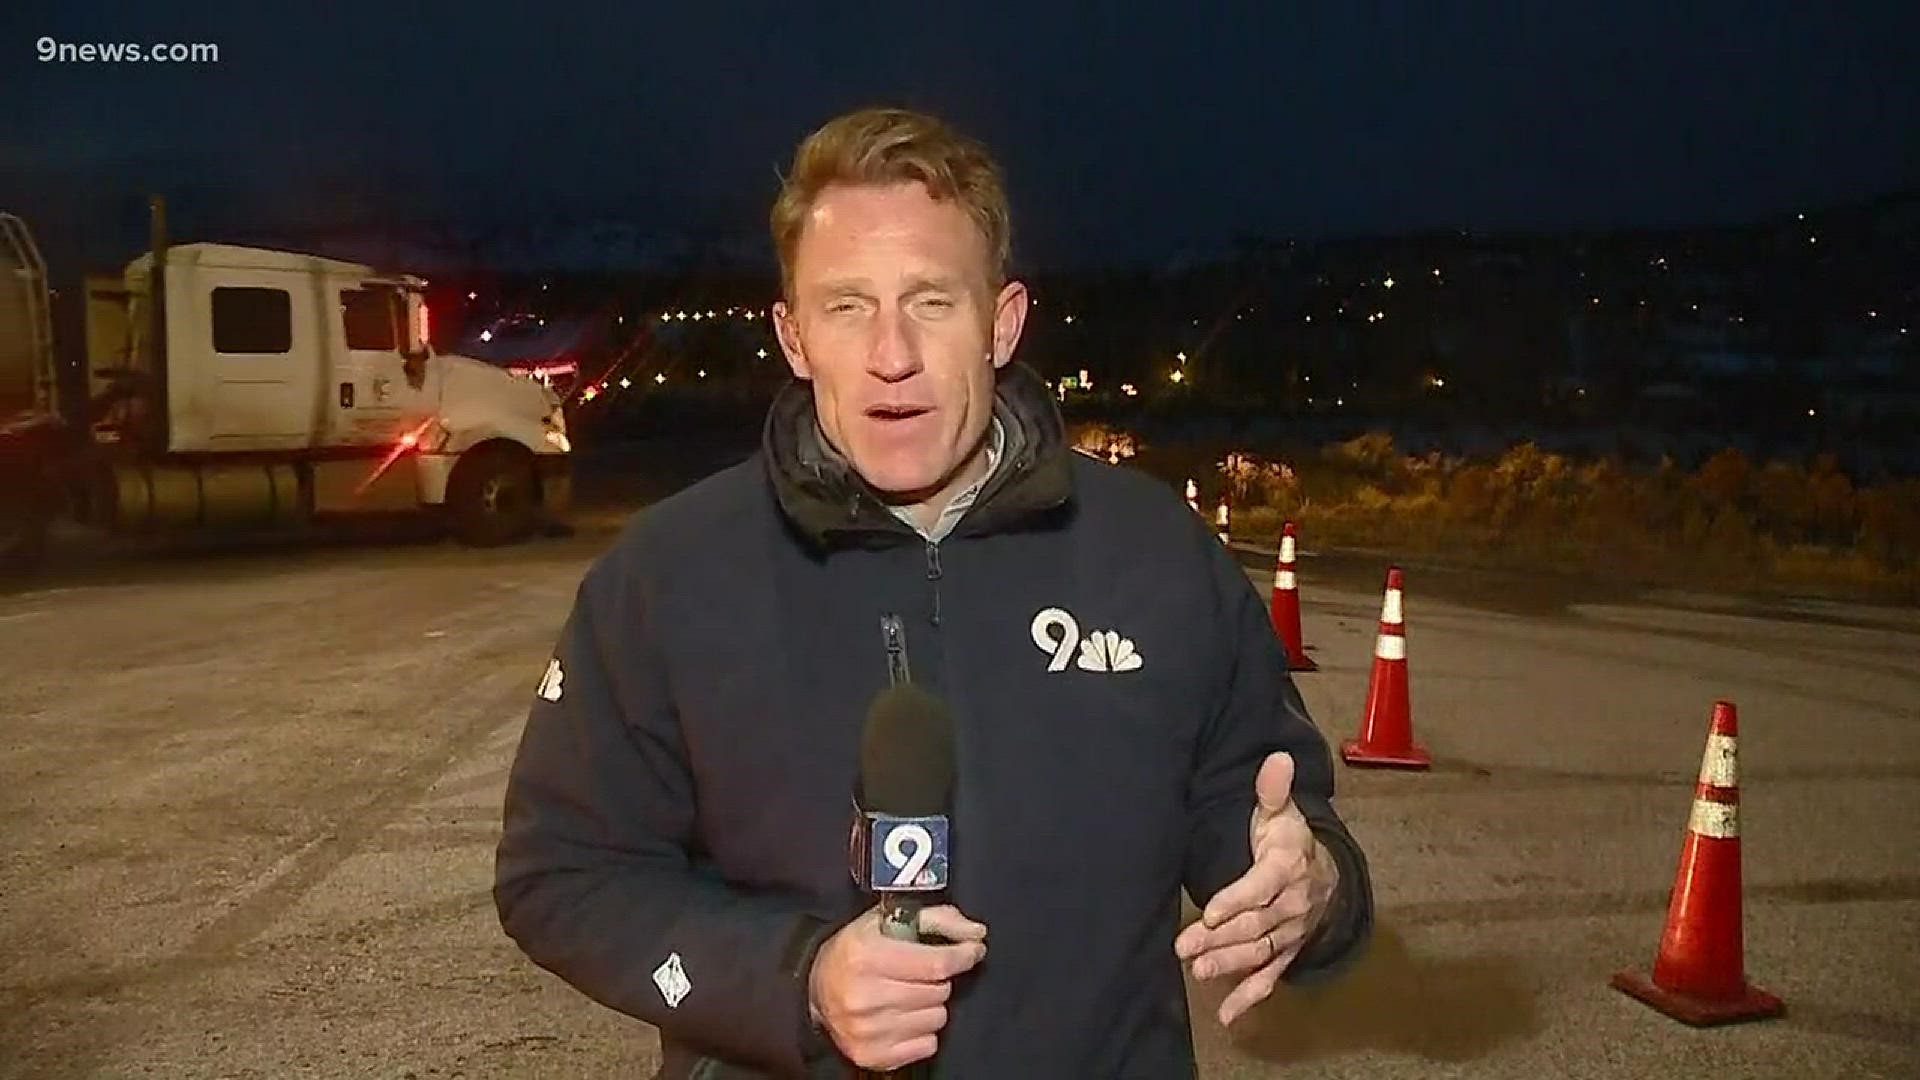 I-70 is expected to be closed through Glenwood Canyon for most of the day due to a rockslide. The detour around will add about 200 miles to your trip.